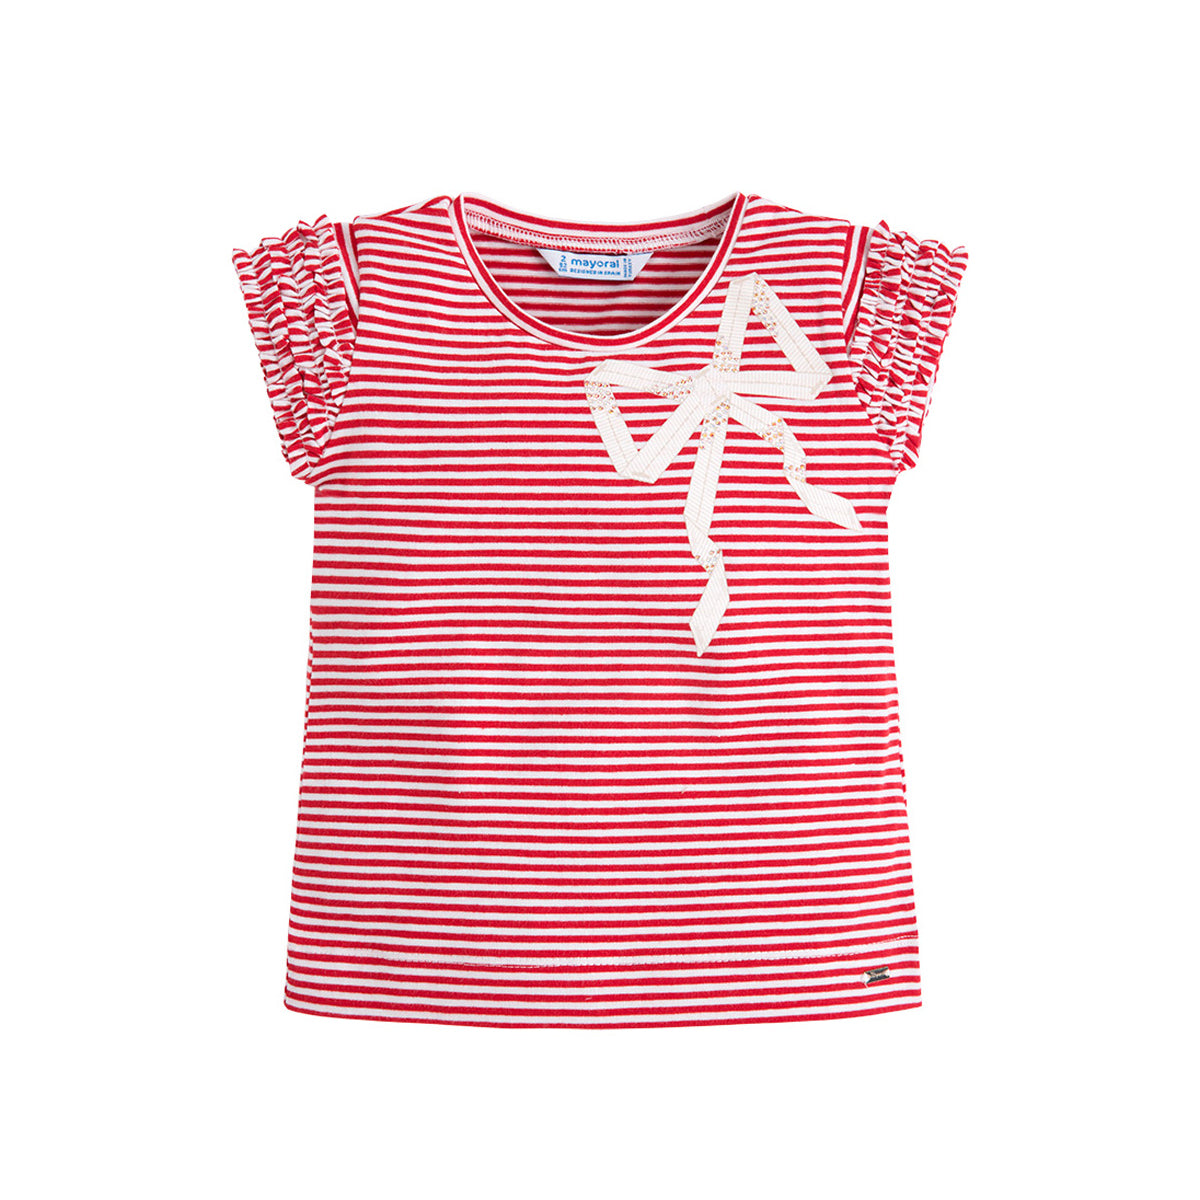 Red & White Stripe Top With Bow